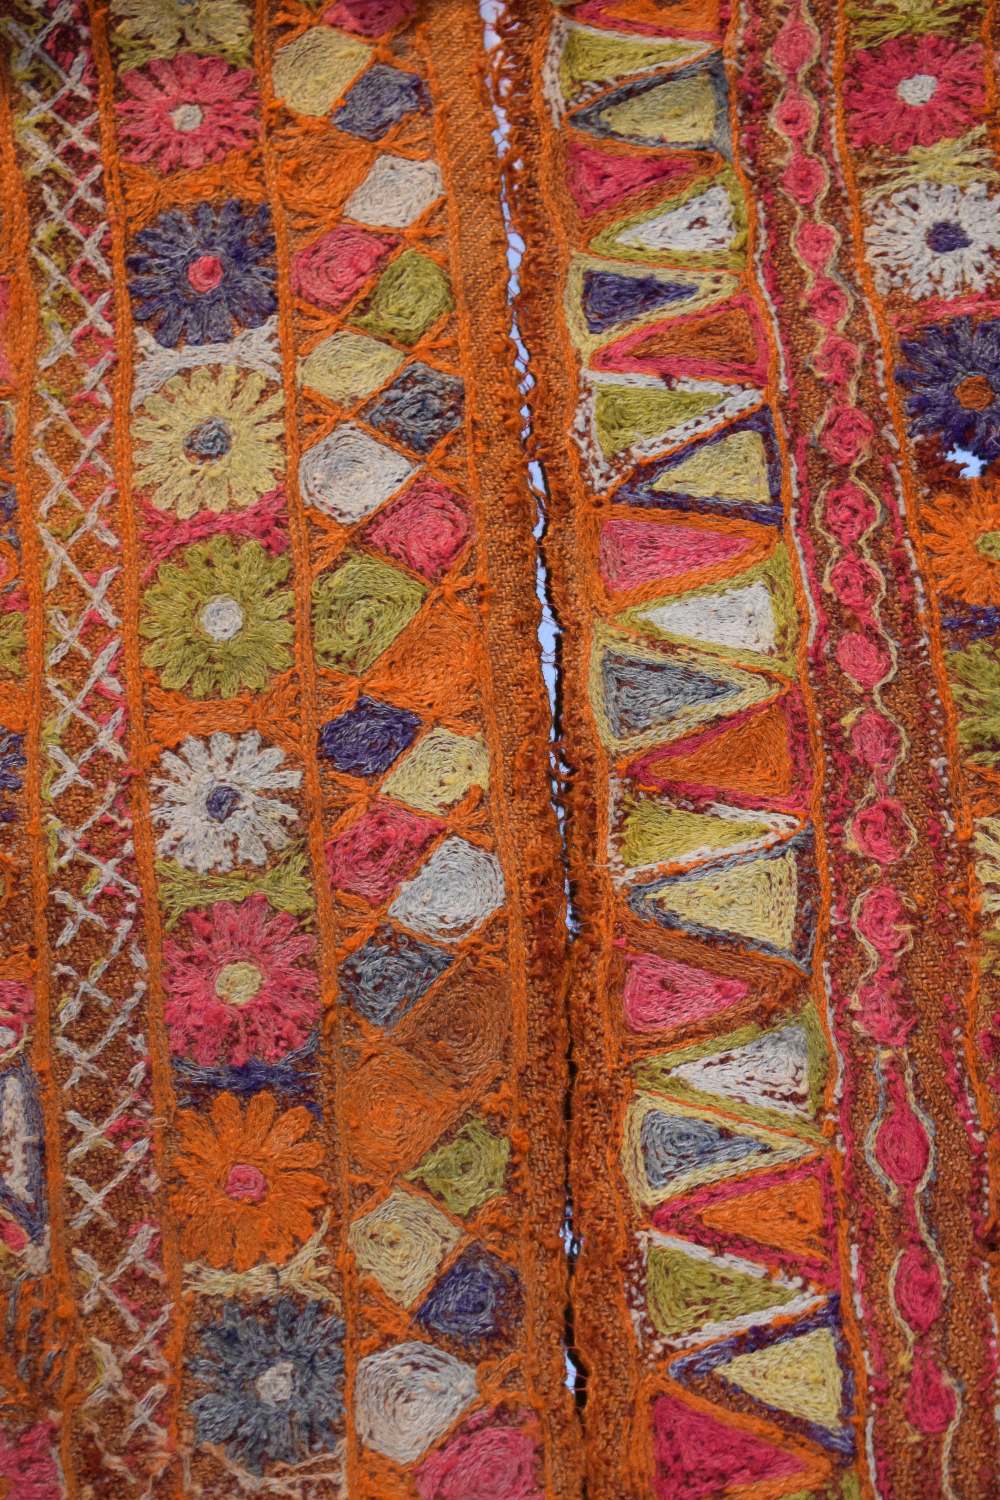 Iraqi embroidered wedding blanket, Samawa, Marshlands of southern Iraq, 20th century, 5ft. 4in. 1. - Image 8 of 13